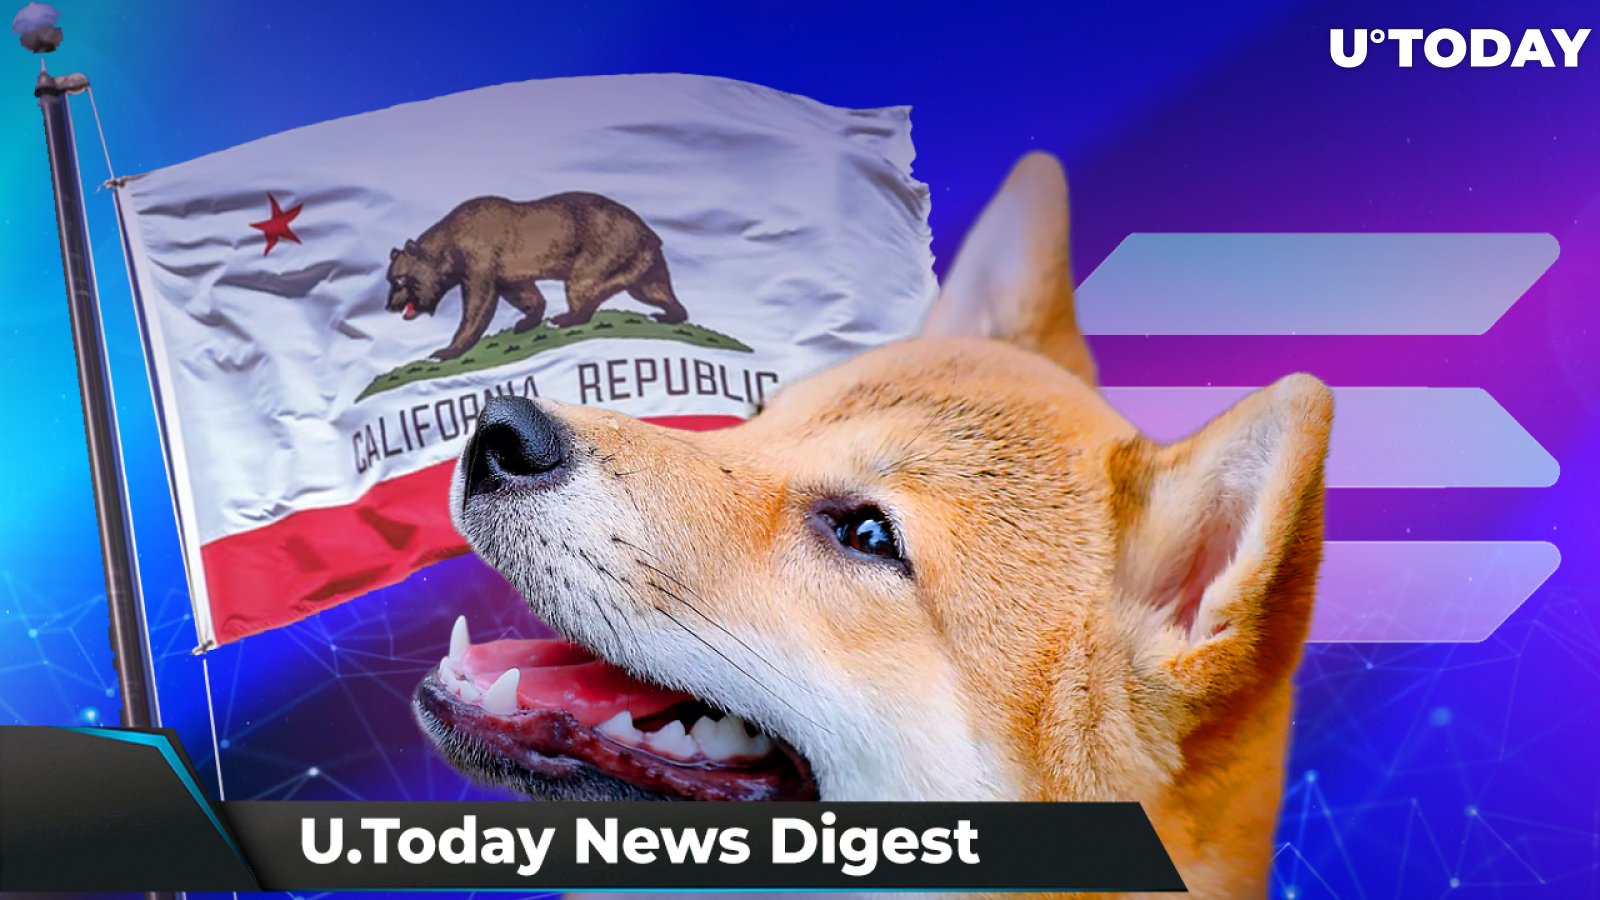 Charles Hoskinson Trolls Solana, SHIB Suggests Key Trend, DOGE as Legal Tender in California: Crypto News Digest by U.Today